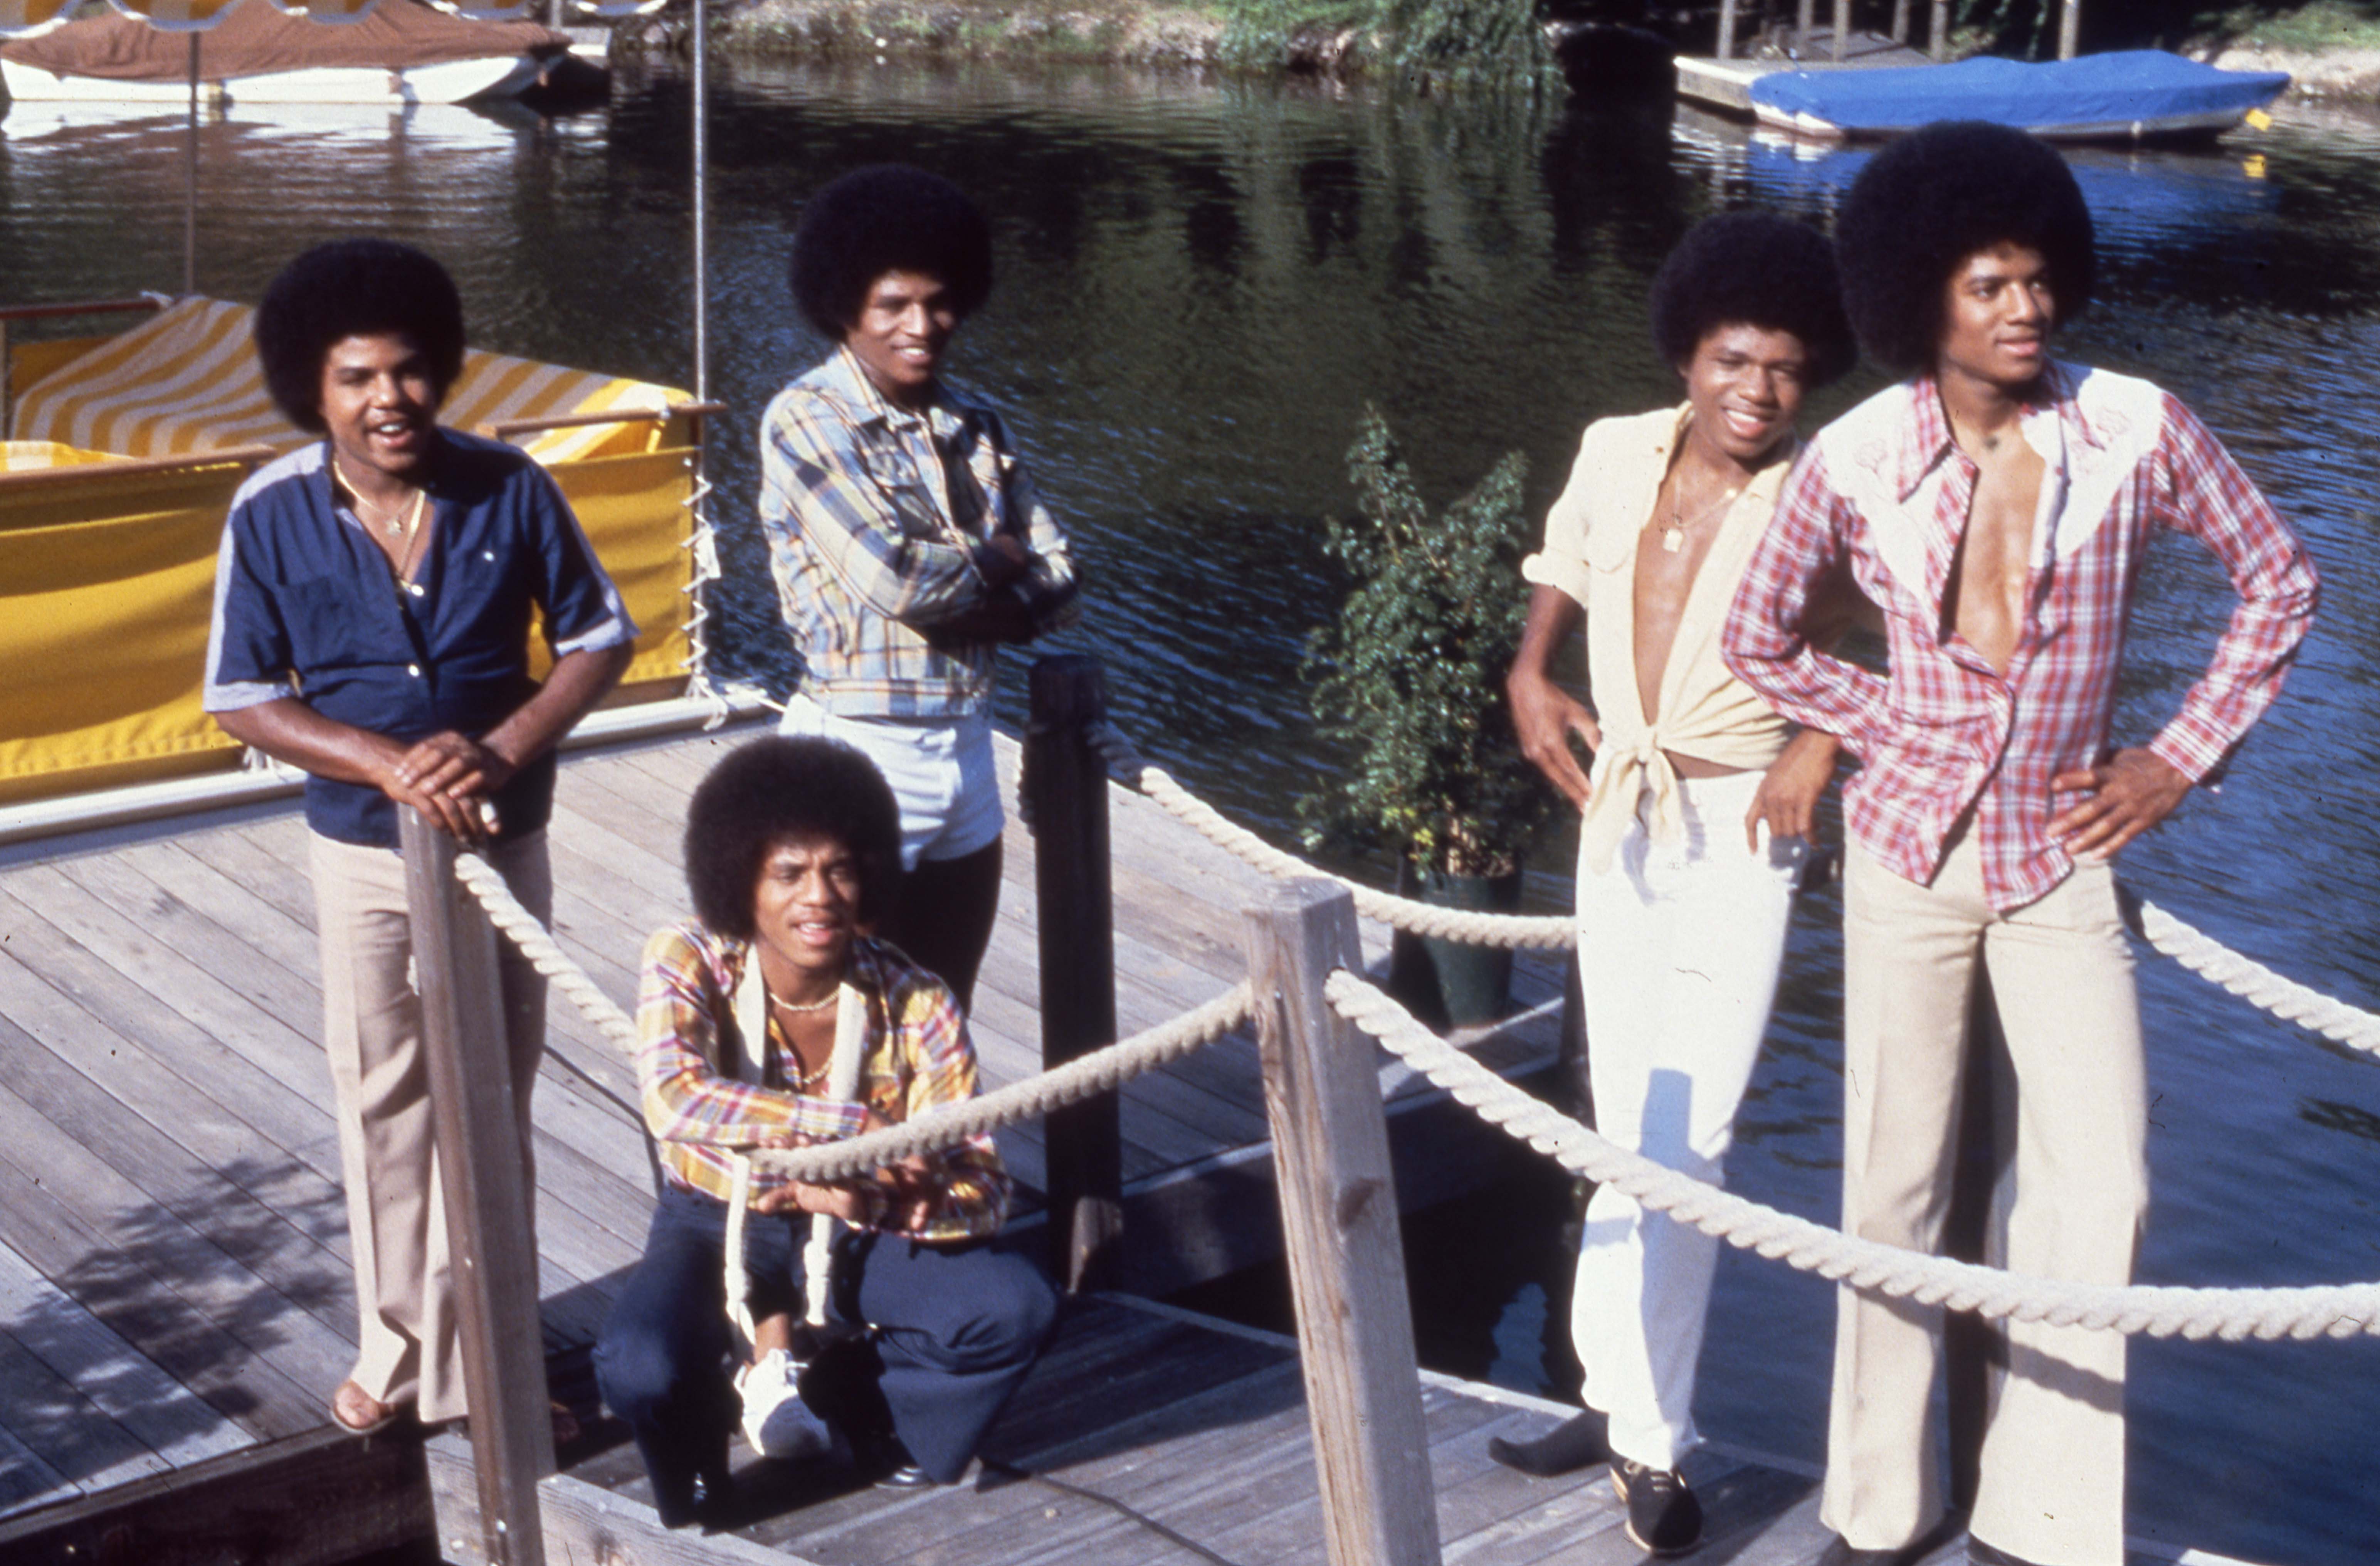 Michael Jackson and his brothers vacationing together circa 1974.